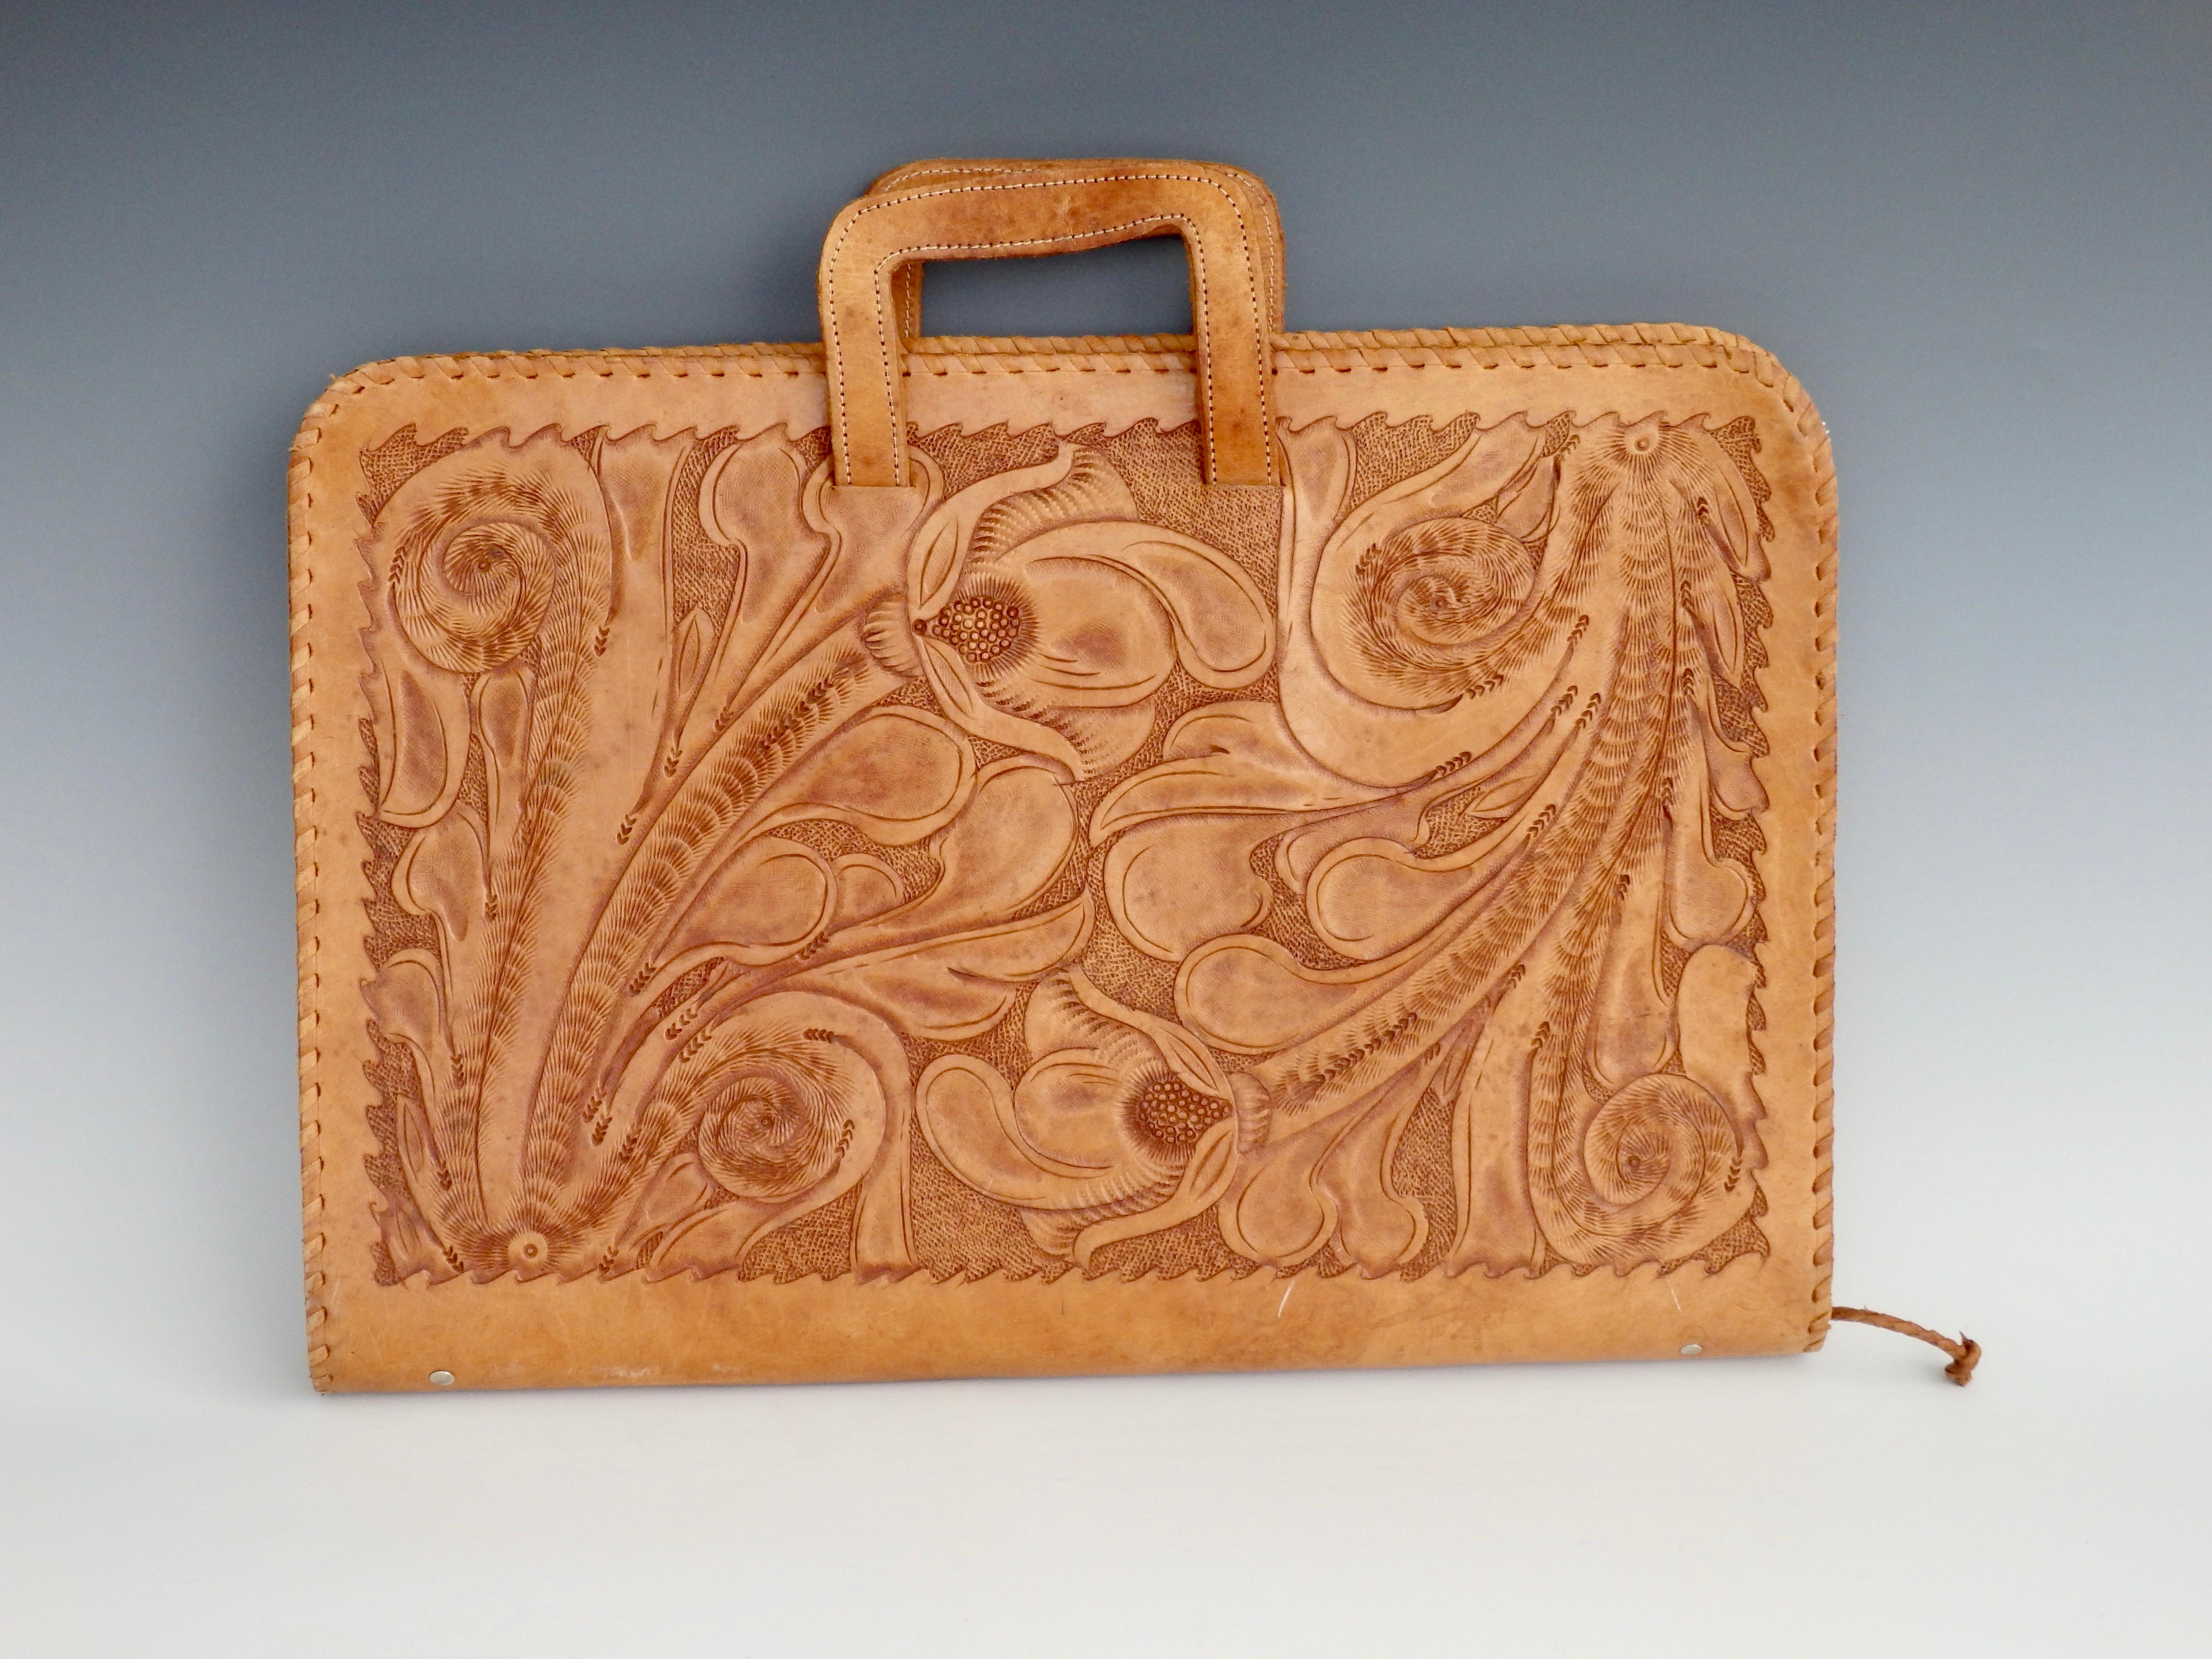 Beautiful hand tooled leather attache case with whipstitch detail, retractable handles and full outer zipper closure. The interior has two interior pockets and one zippered compartment.